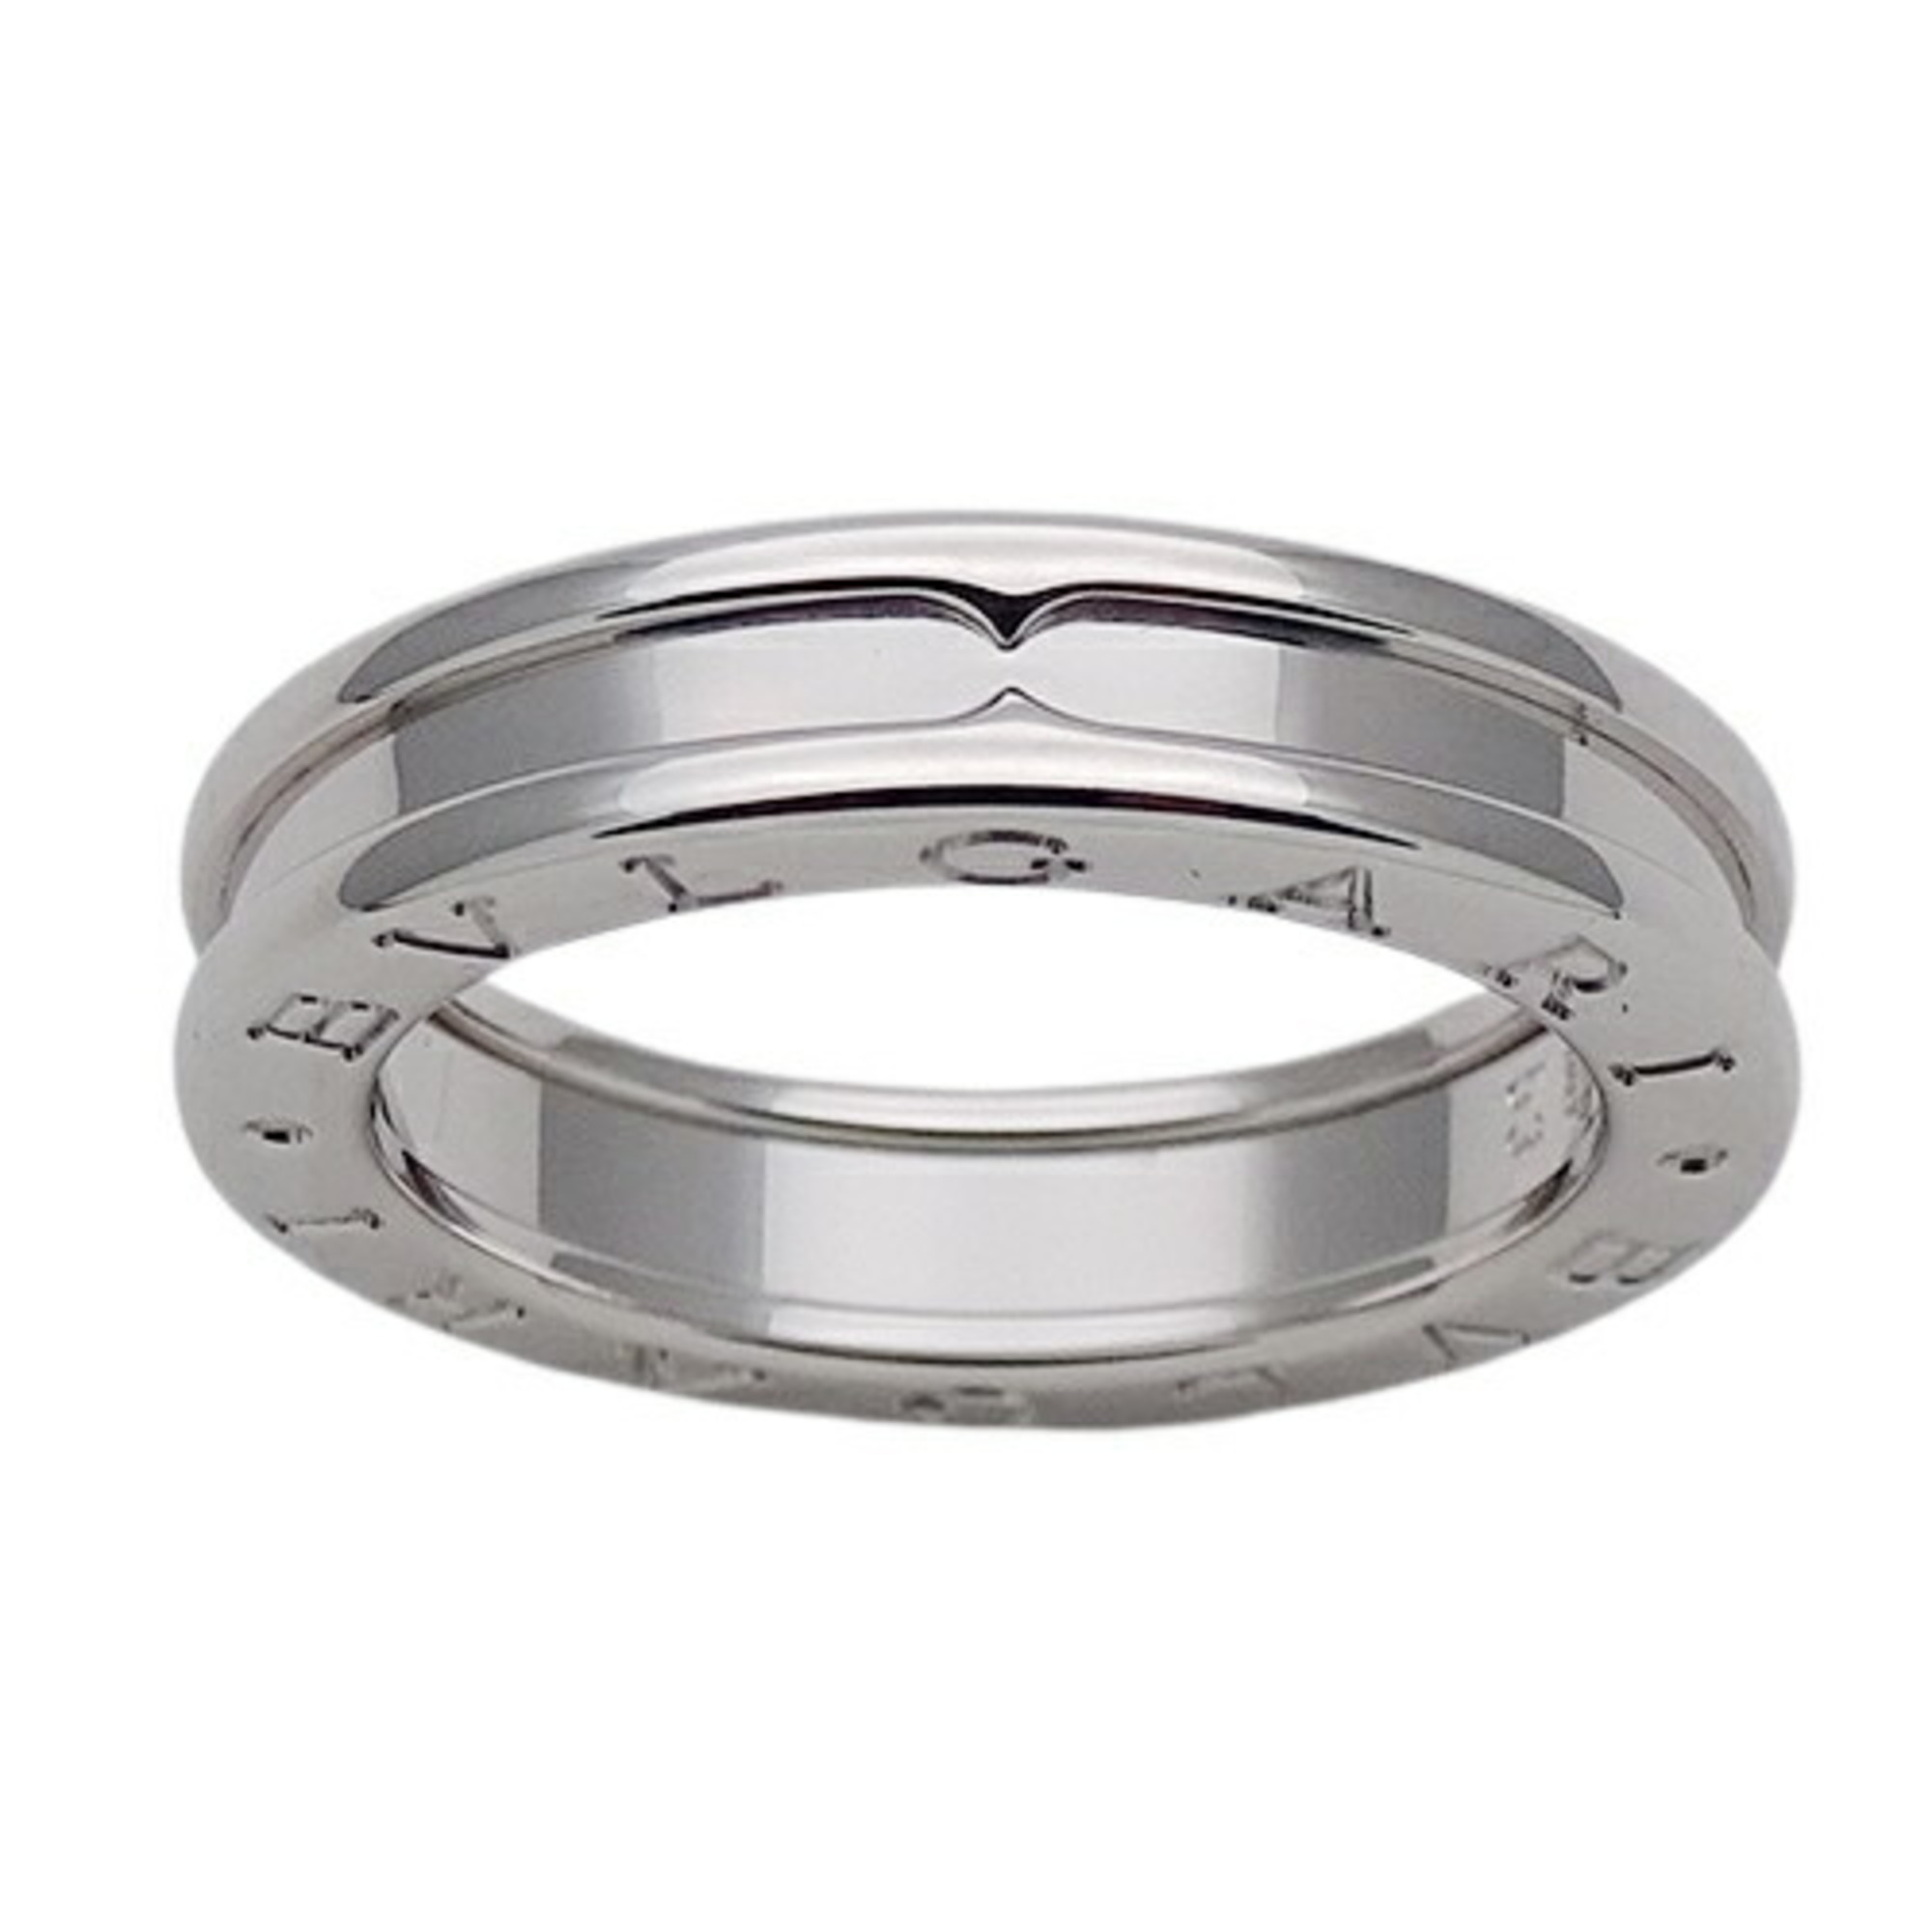 BVLGARI Ring for Women and Men, 750WG B-zero1, White Gold, 1 Band, #53, Approx. Size 13, Polished